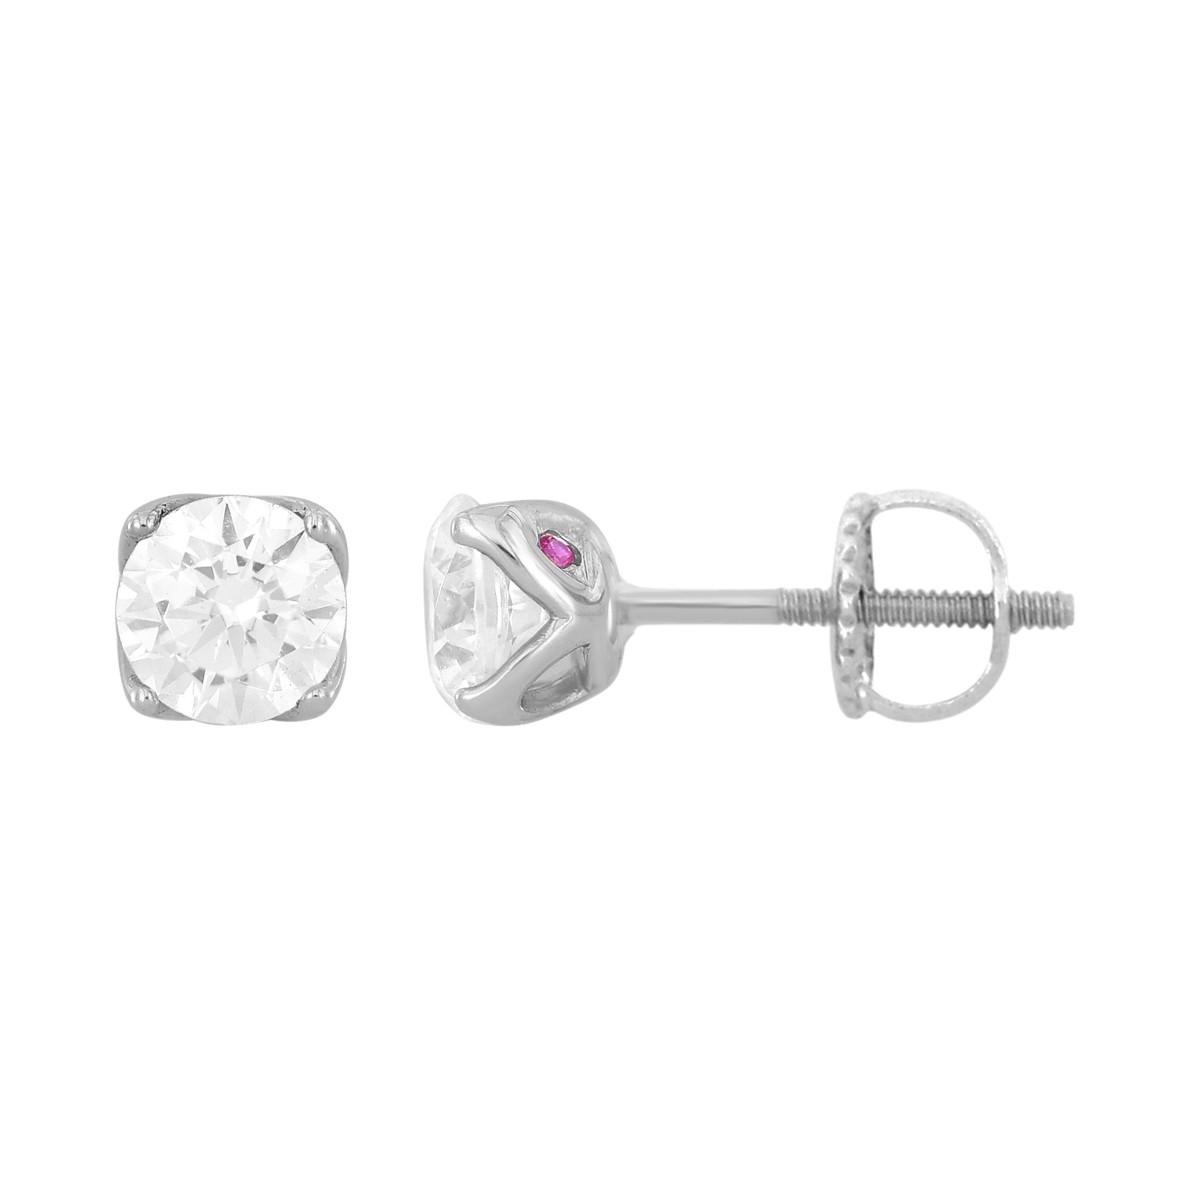 14K WHITE GOLD 1/4CT ROUND DIAMOND LADIES SOLITAIRE EARRINGS 